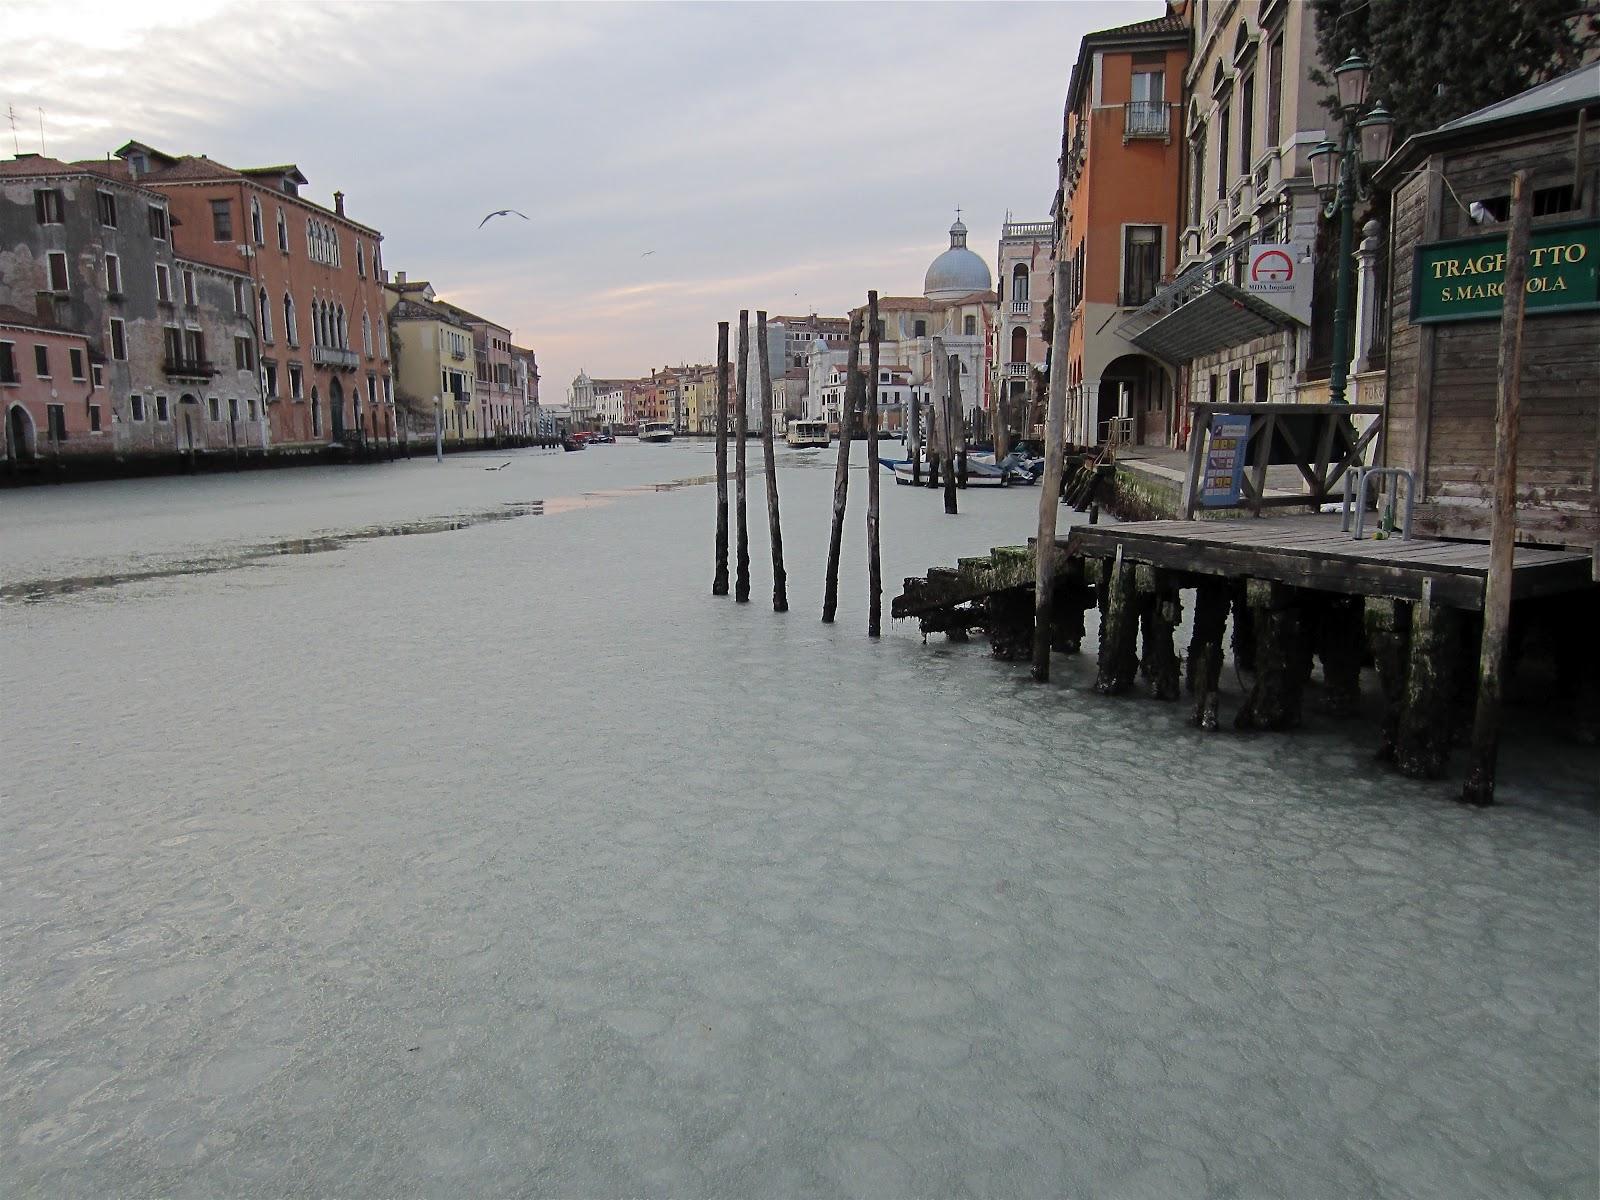 venezia blog: Dreams of Ice Skating on the Grand Canal, This Afternoon